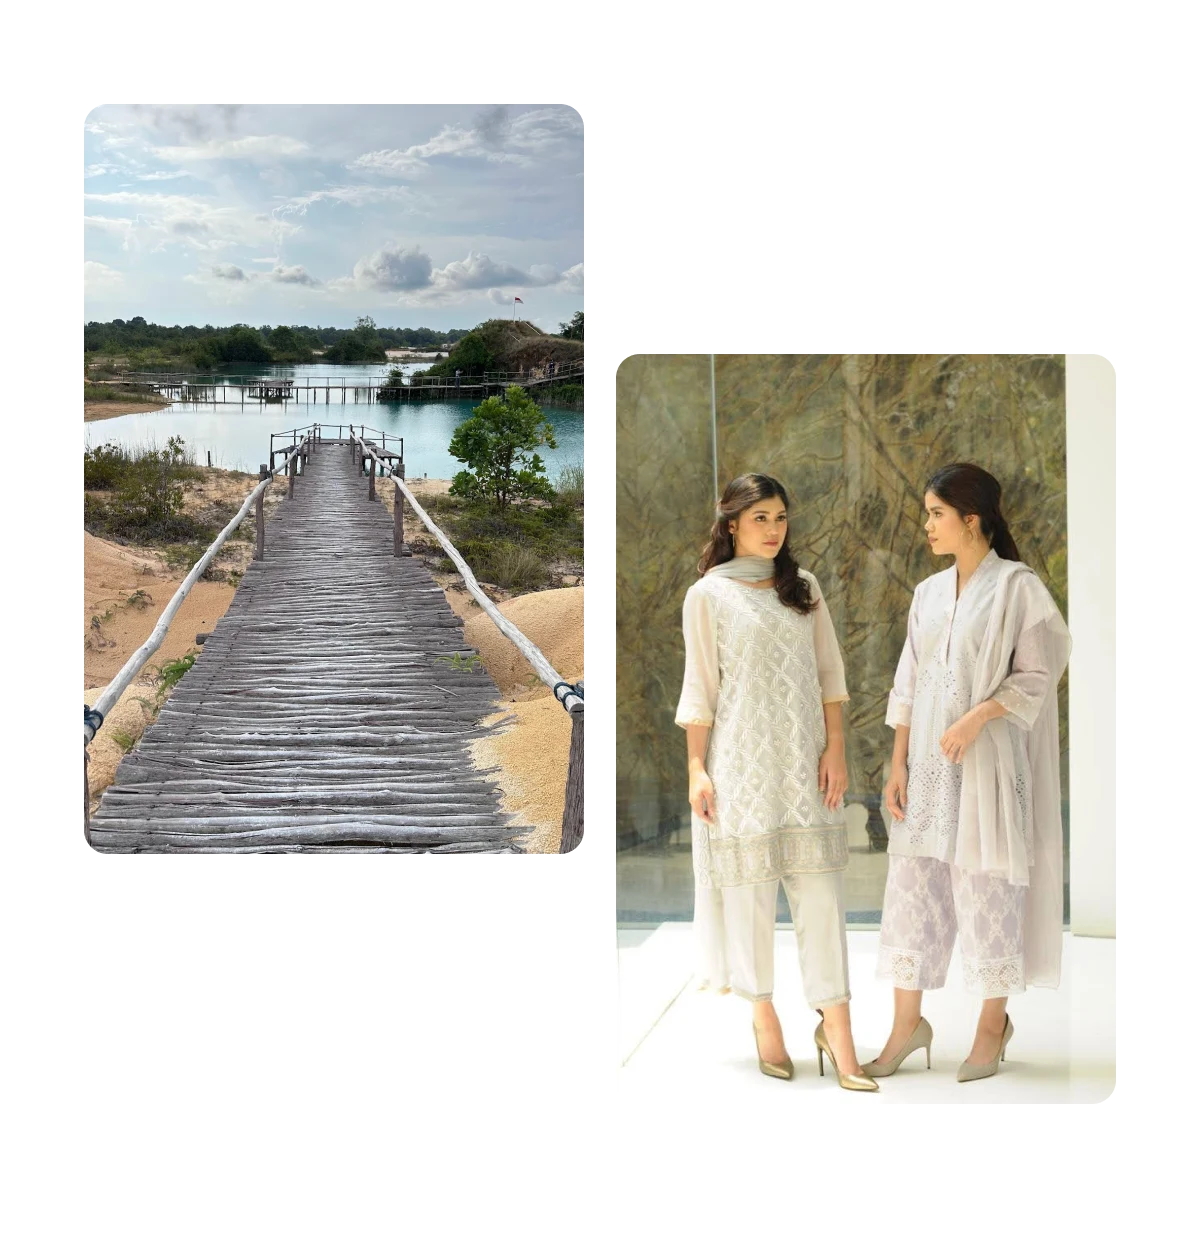 Two pins, wooden path leading to water, two women dressed in white